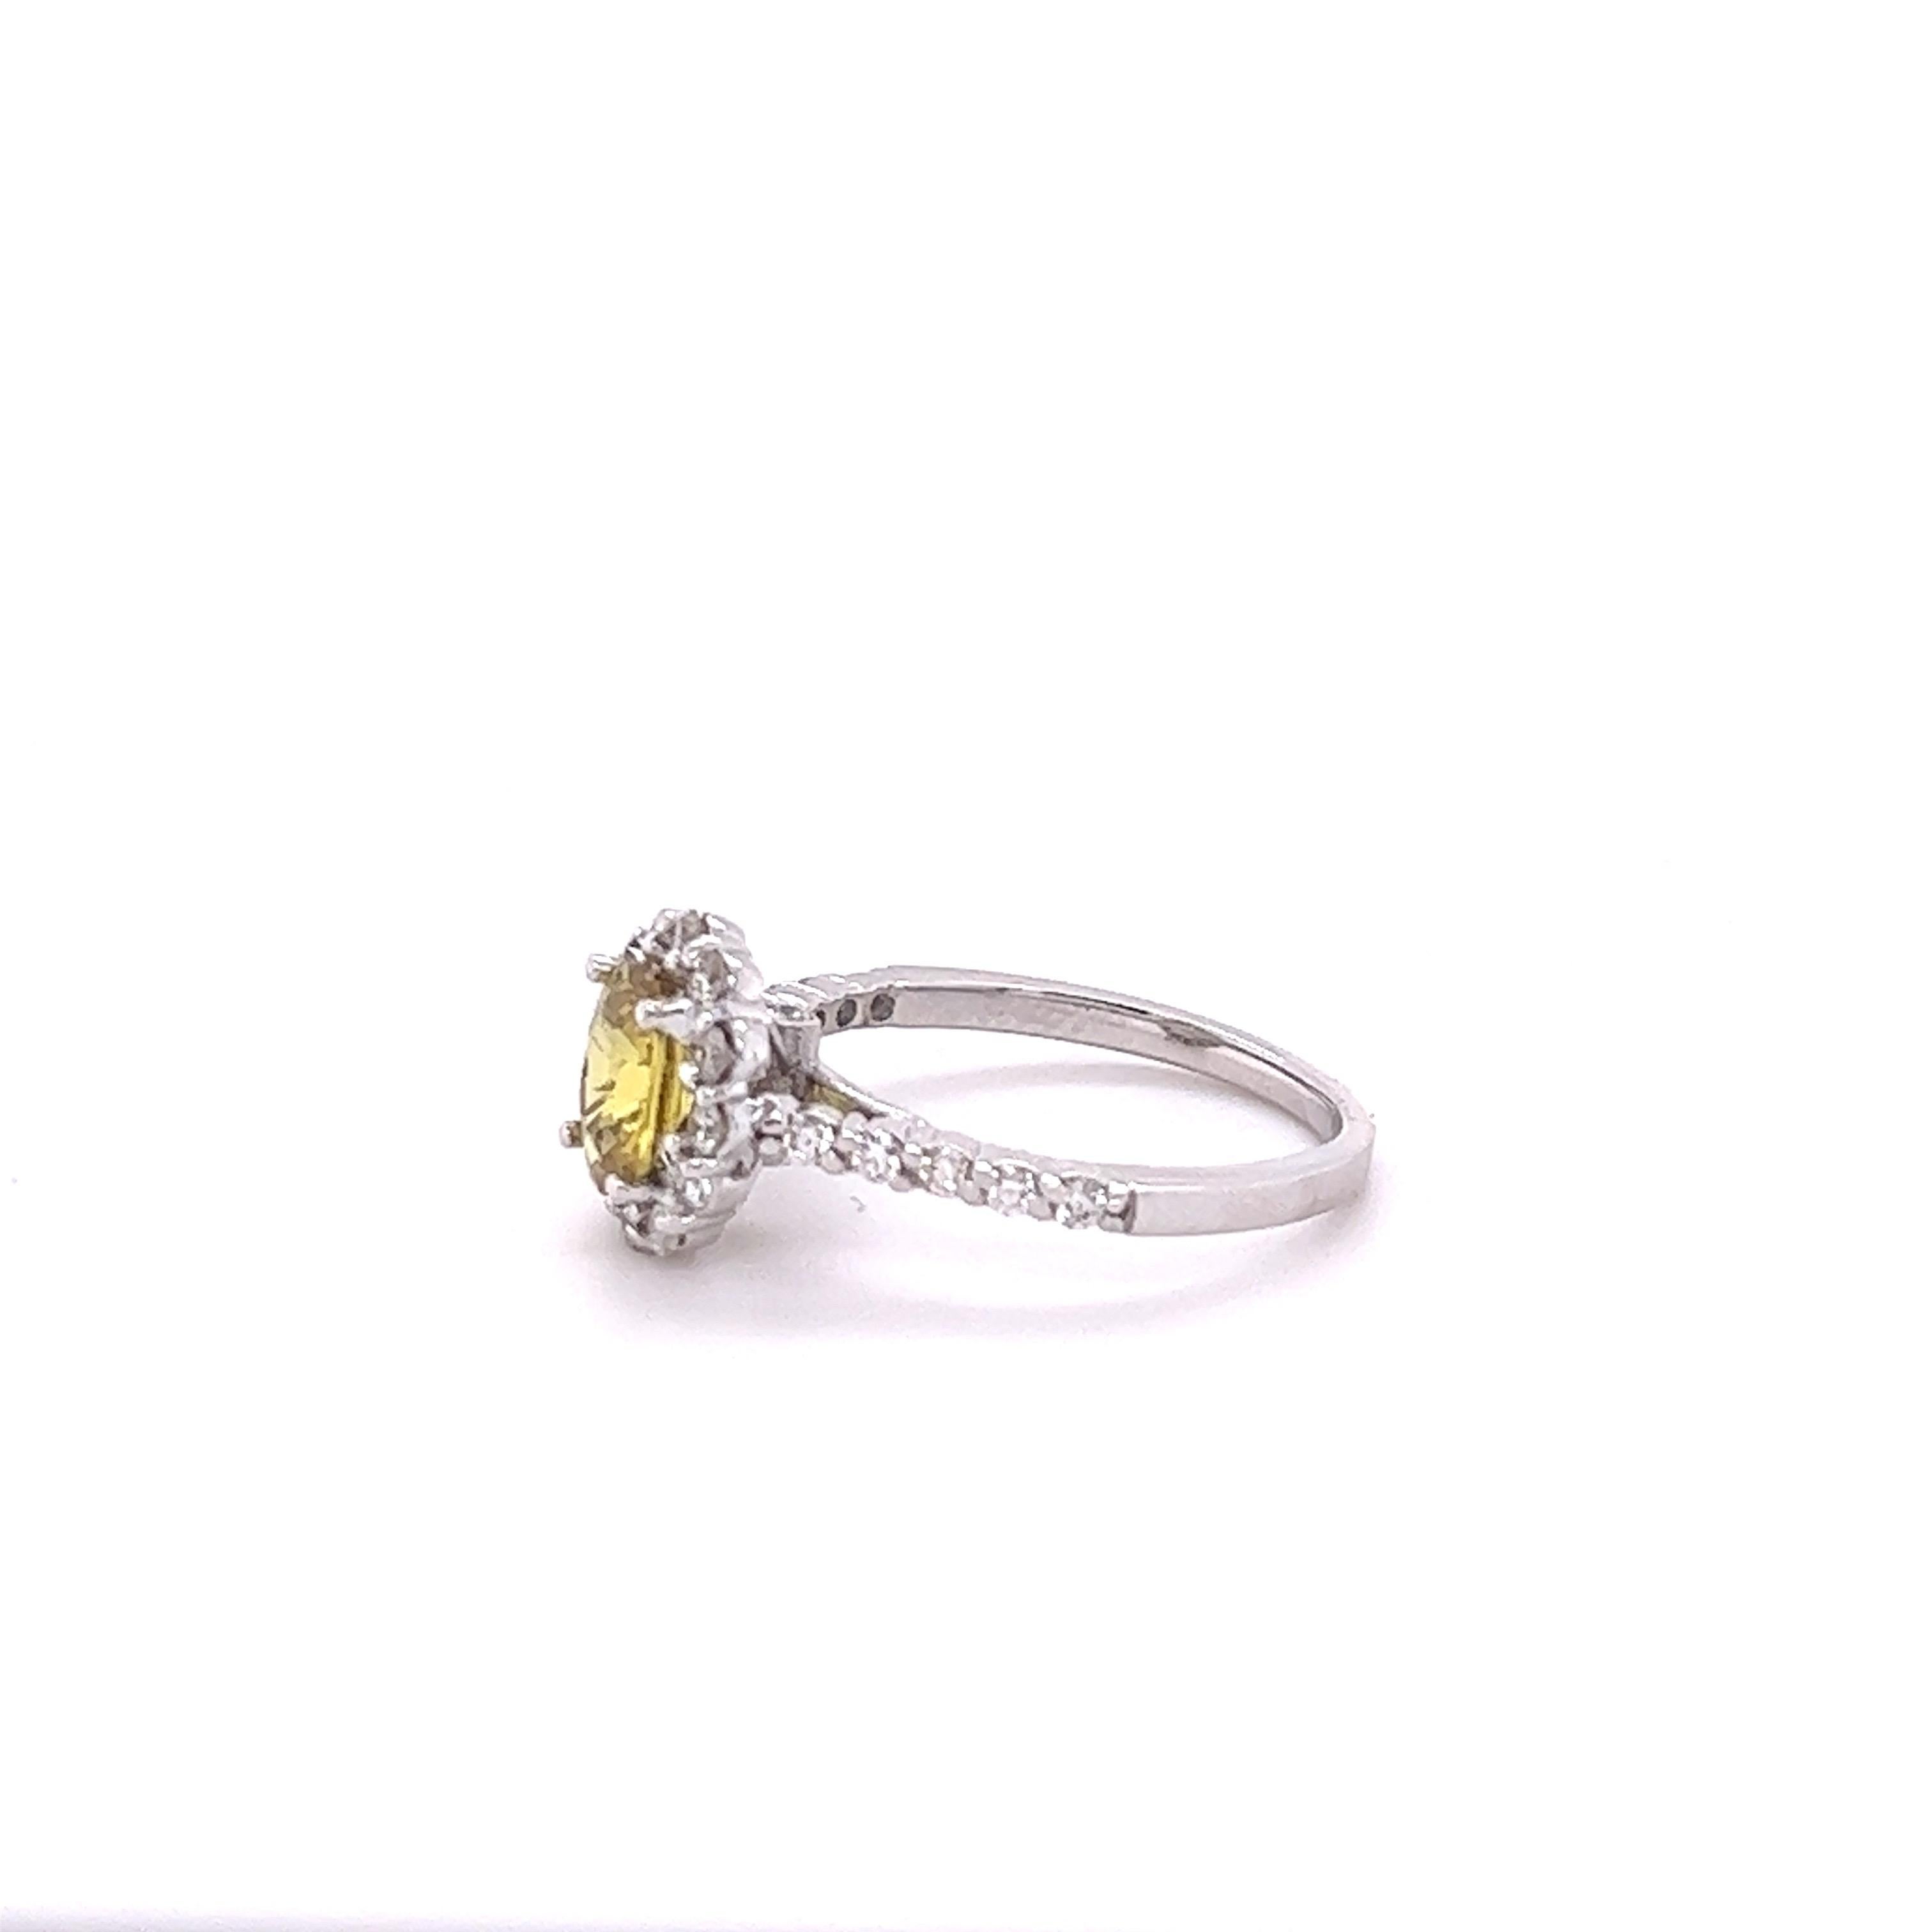 Contemporary GIA Certified 1.62 Carat Yellow Sapphire Diamond 18 Karat White Gold Ring For Sale